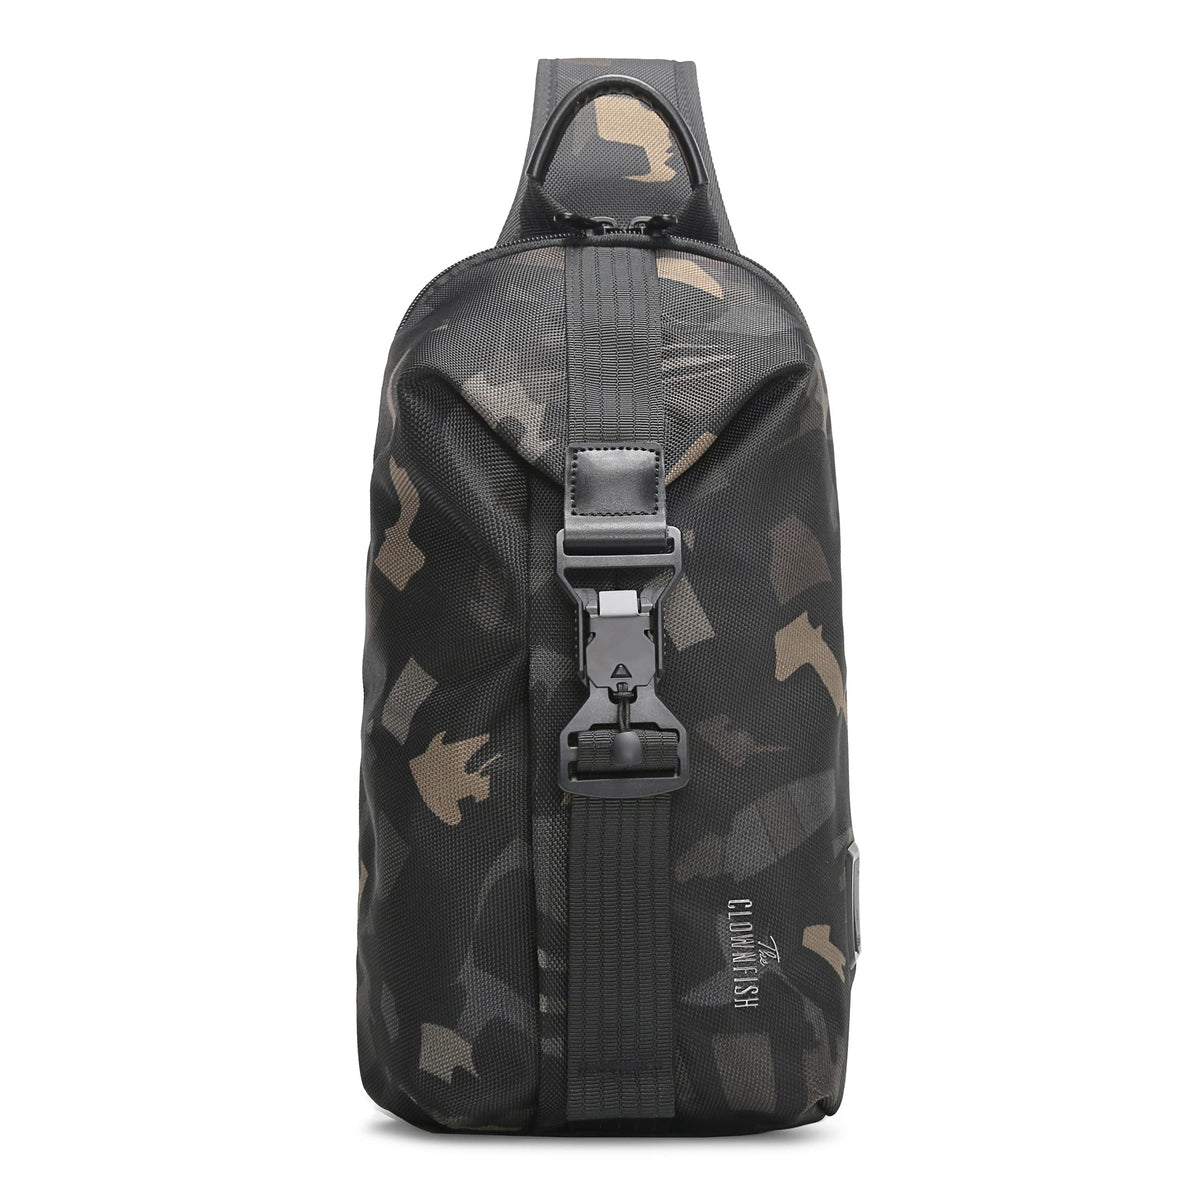 THE CLOWNFISH Unisex-Adult Anti Theft Water Resistant Crossbody Utility Sling Bag With Usb Charging (Camo)